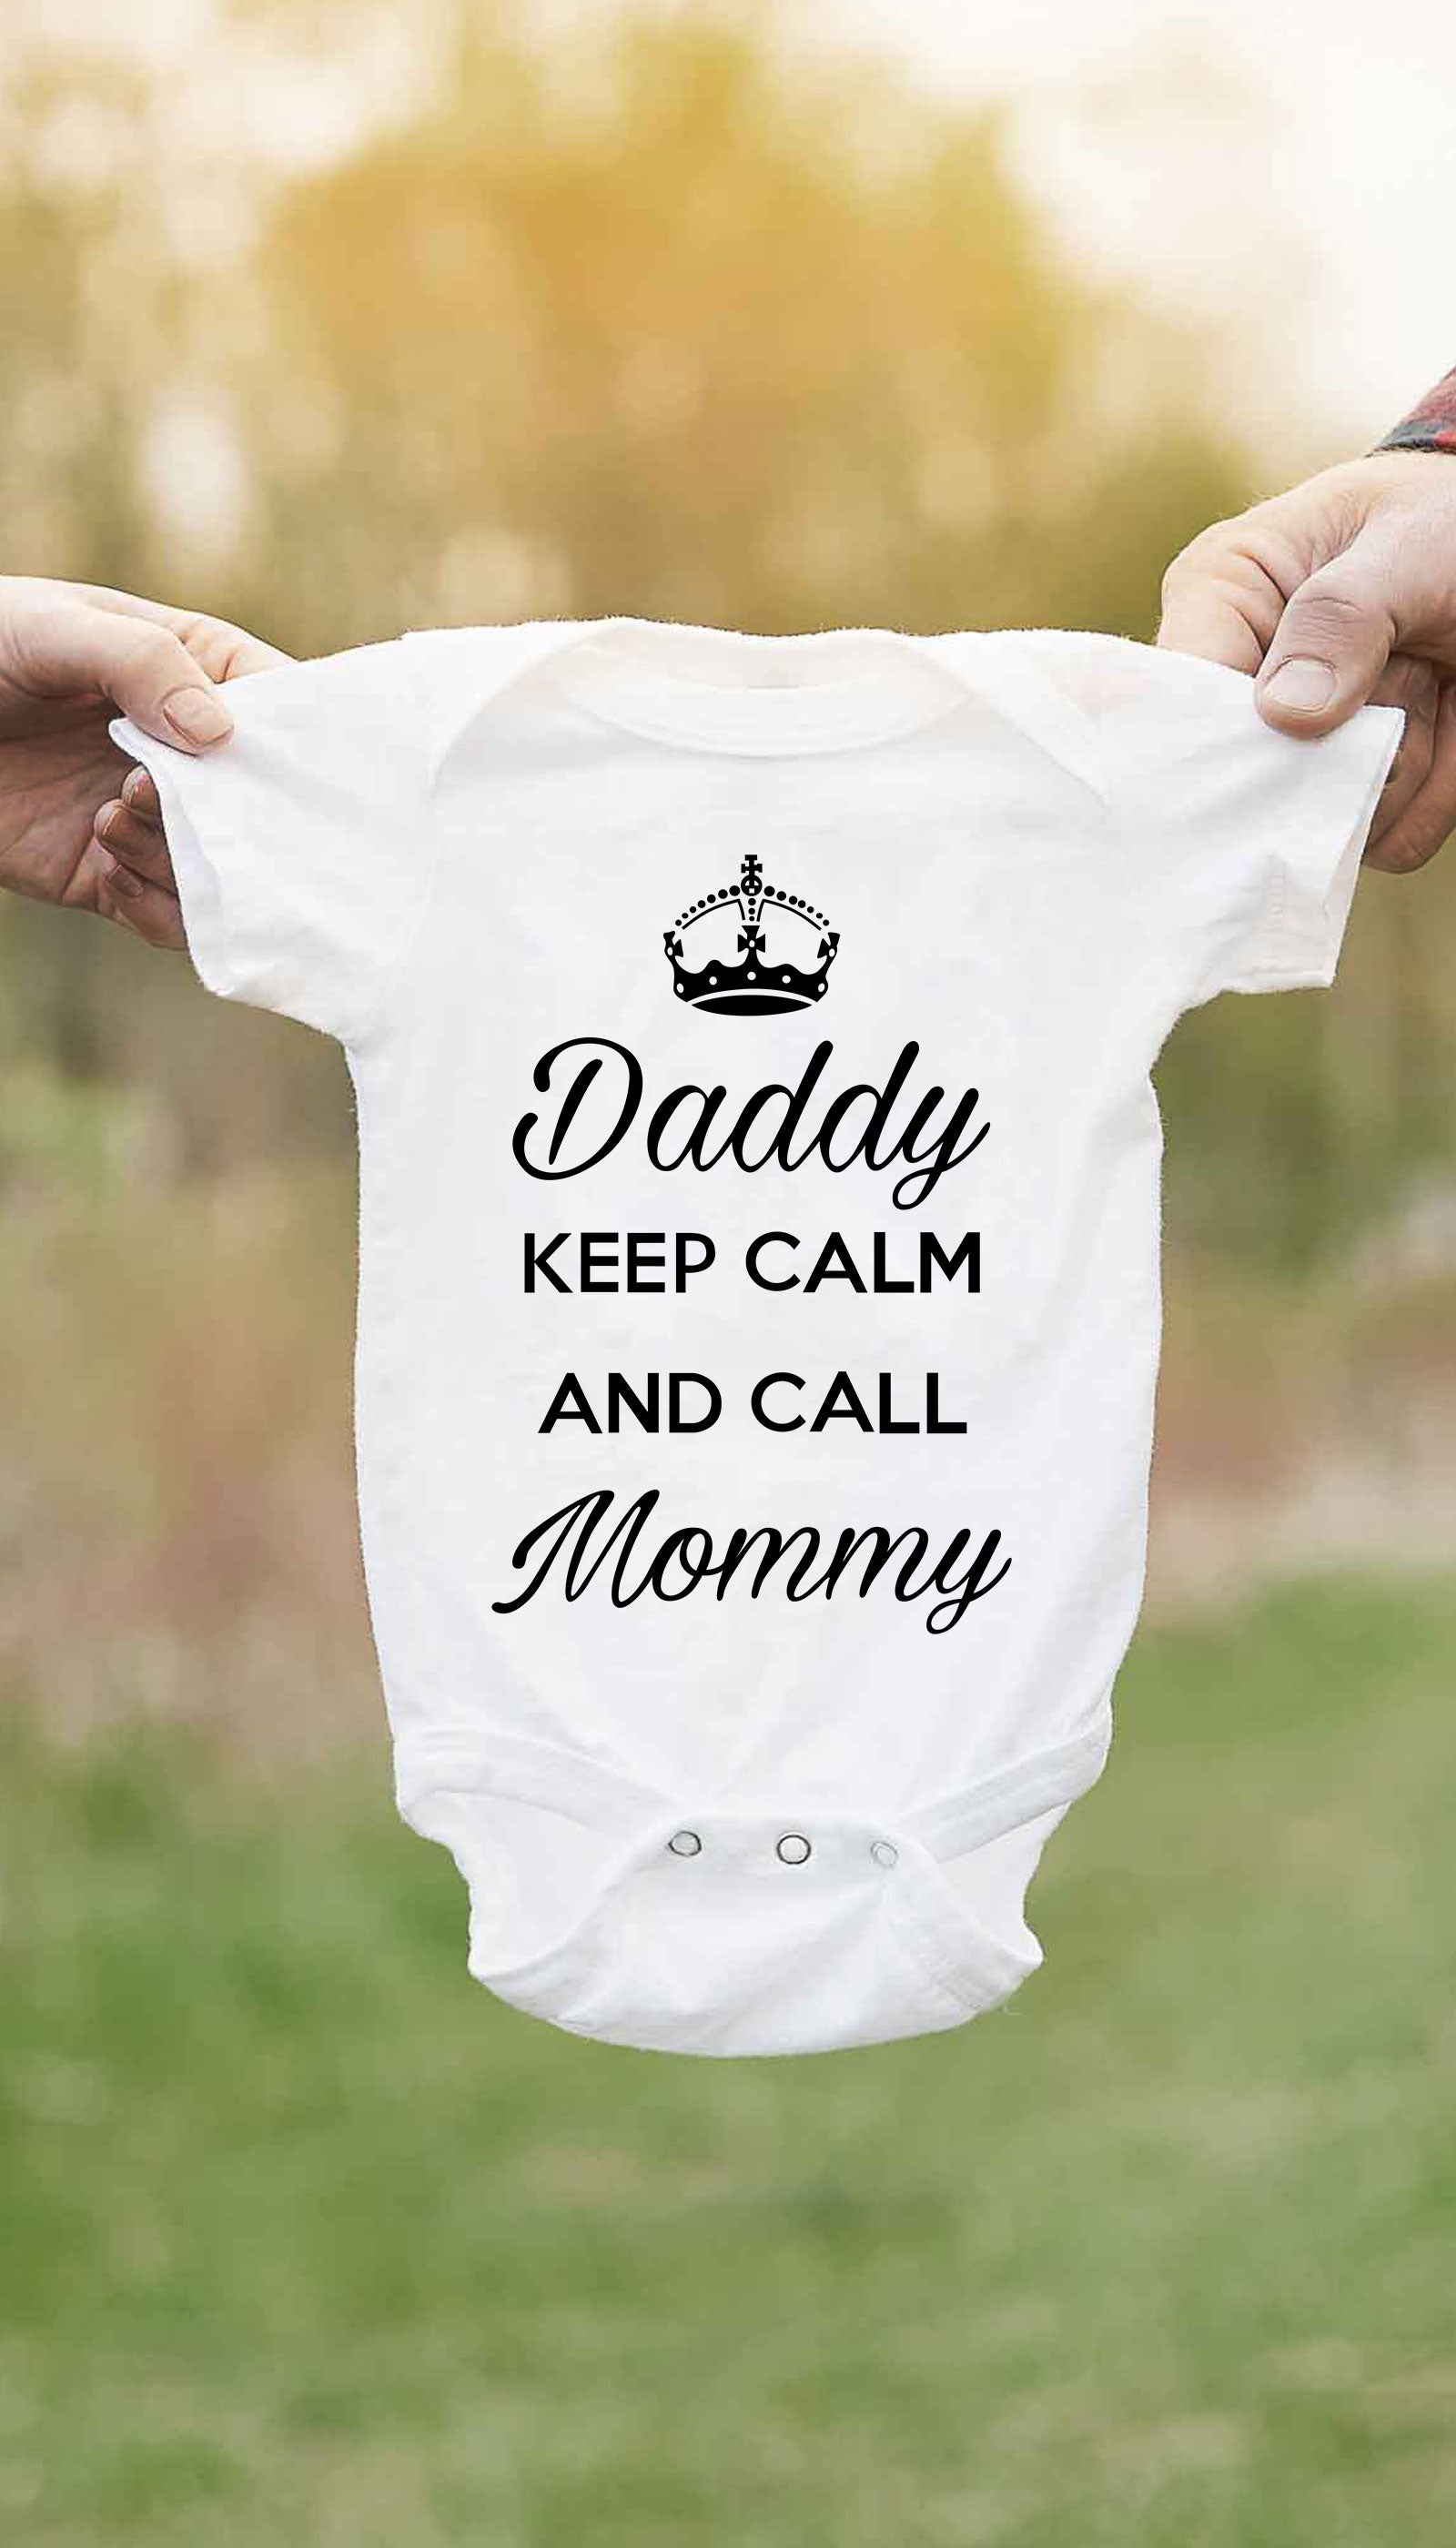 Daddy Keep Calm And Call Mommy Funny Baby Infant Onesie